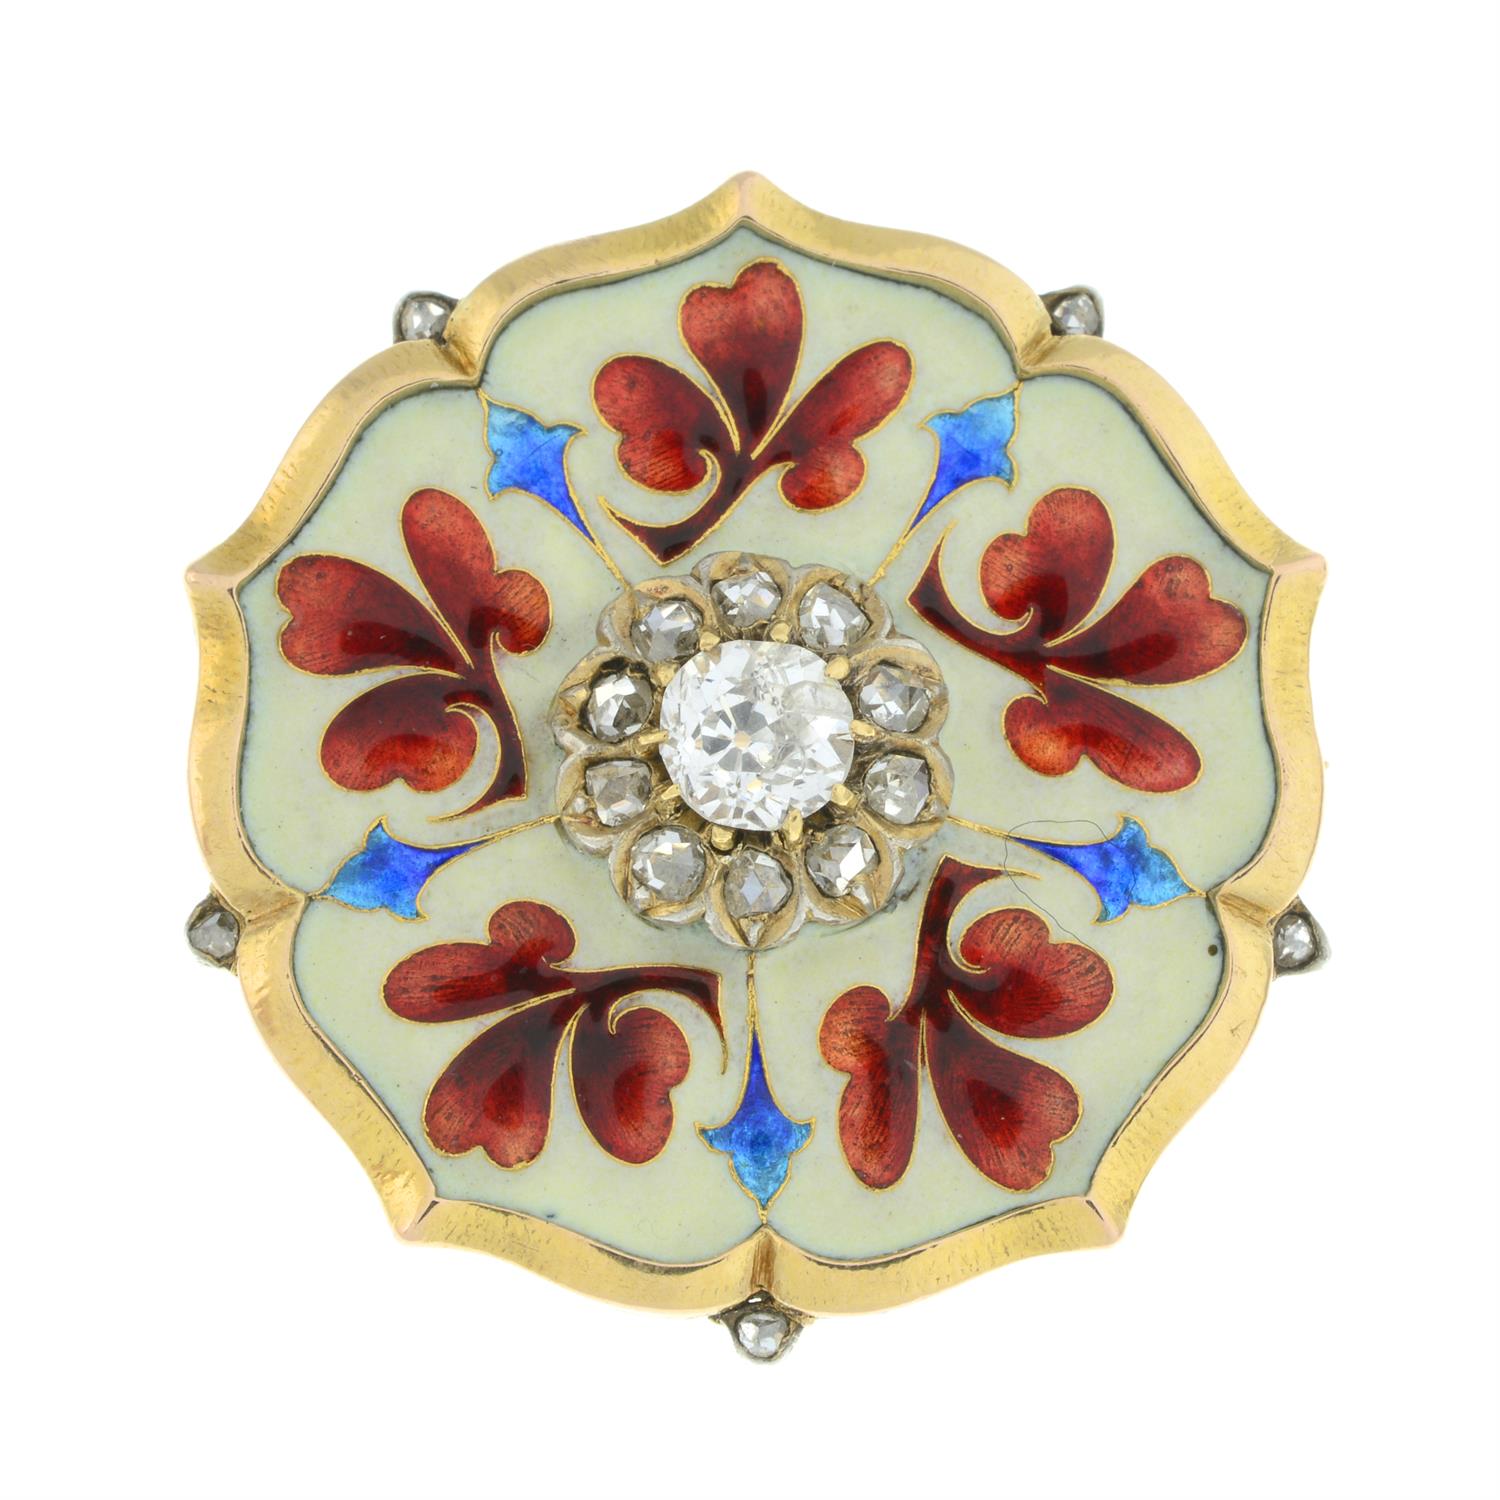 19th century diamond and enamel brooch, attributed to Falize - Image 2 of 4